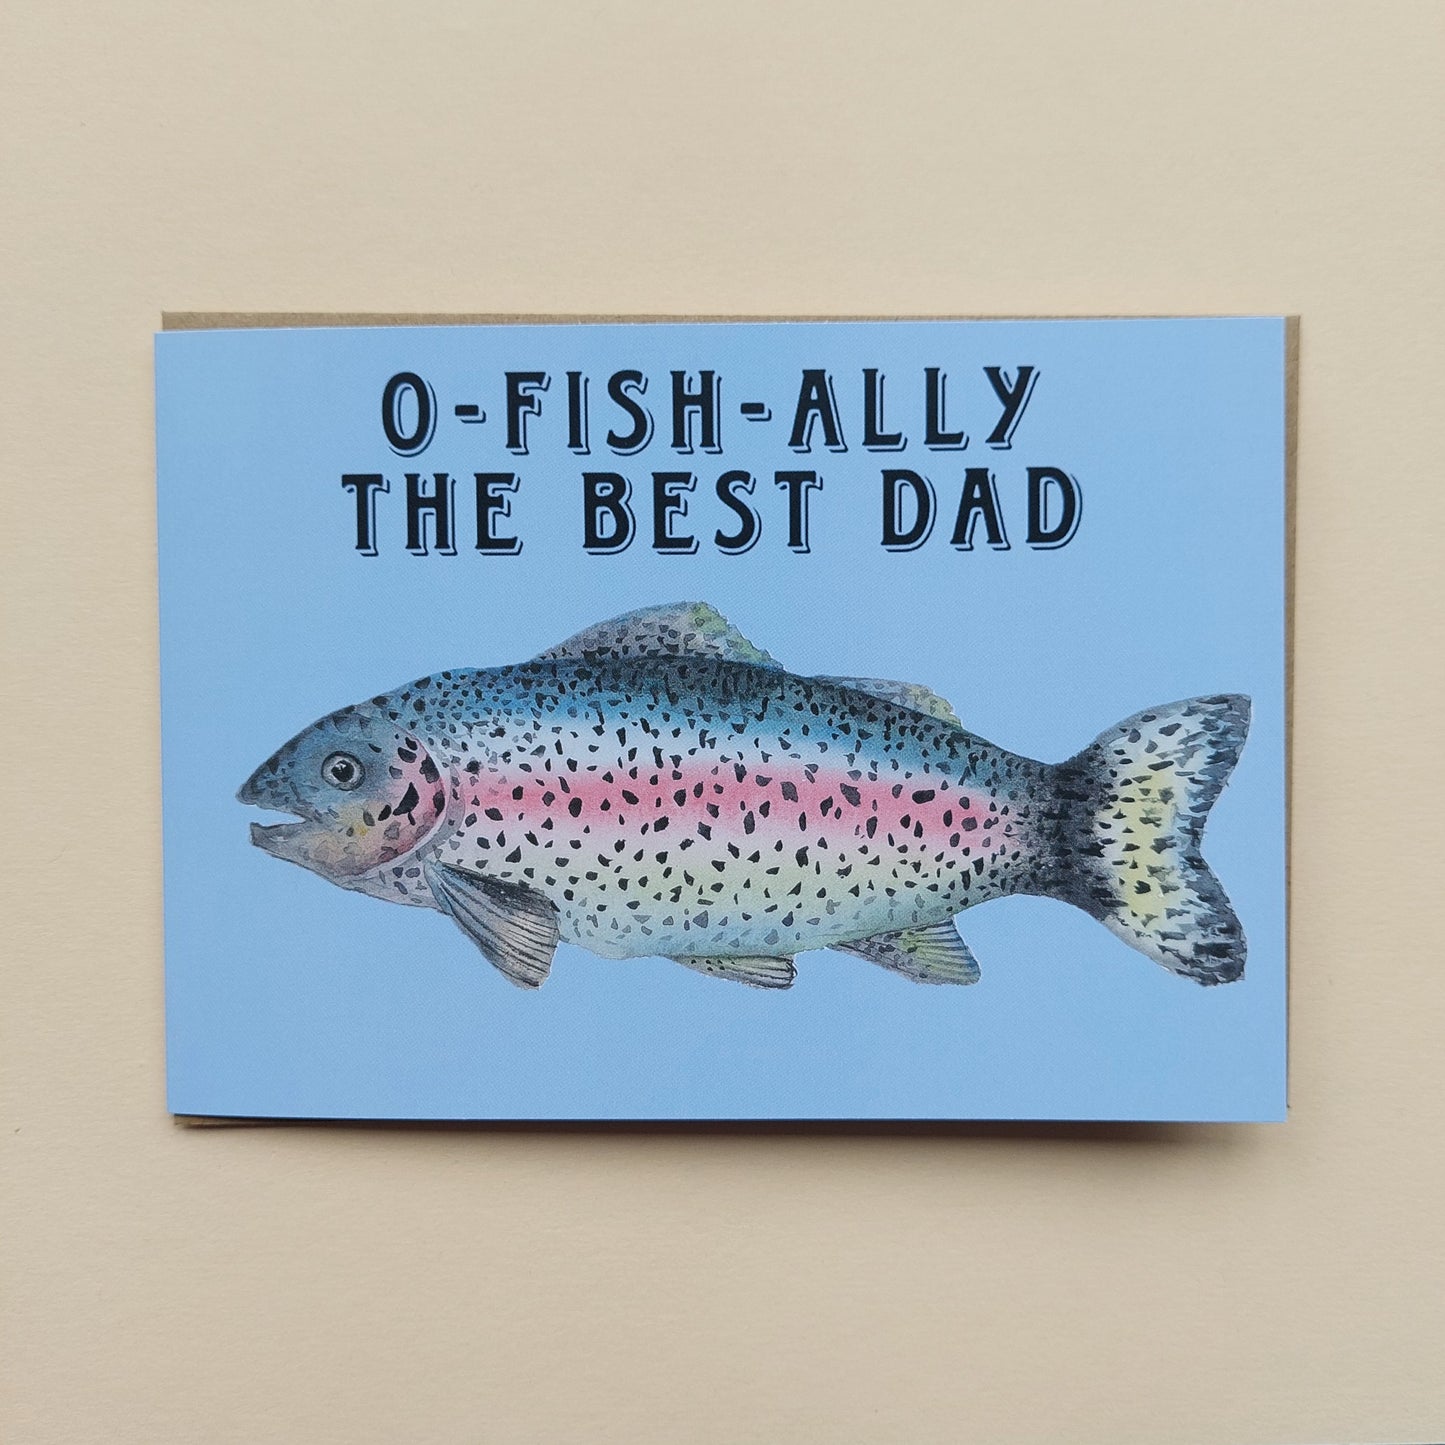 O-fish-ally the best dad